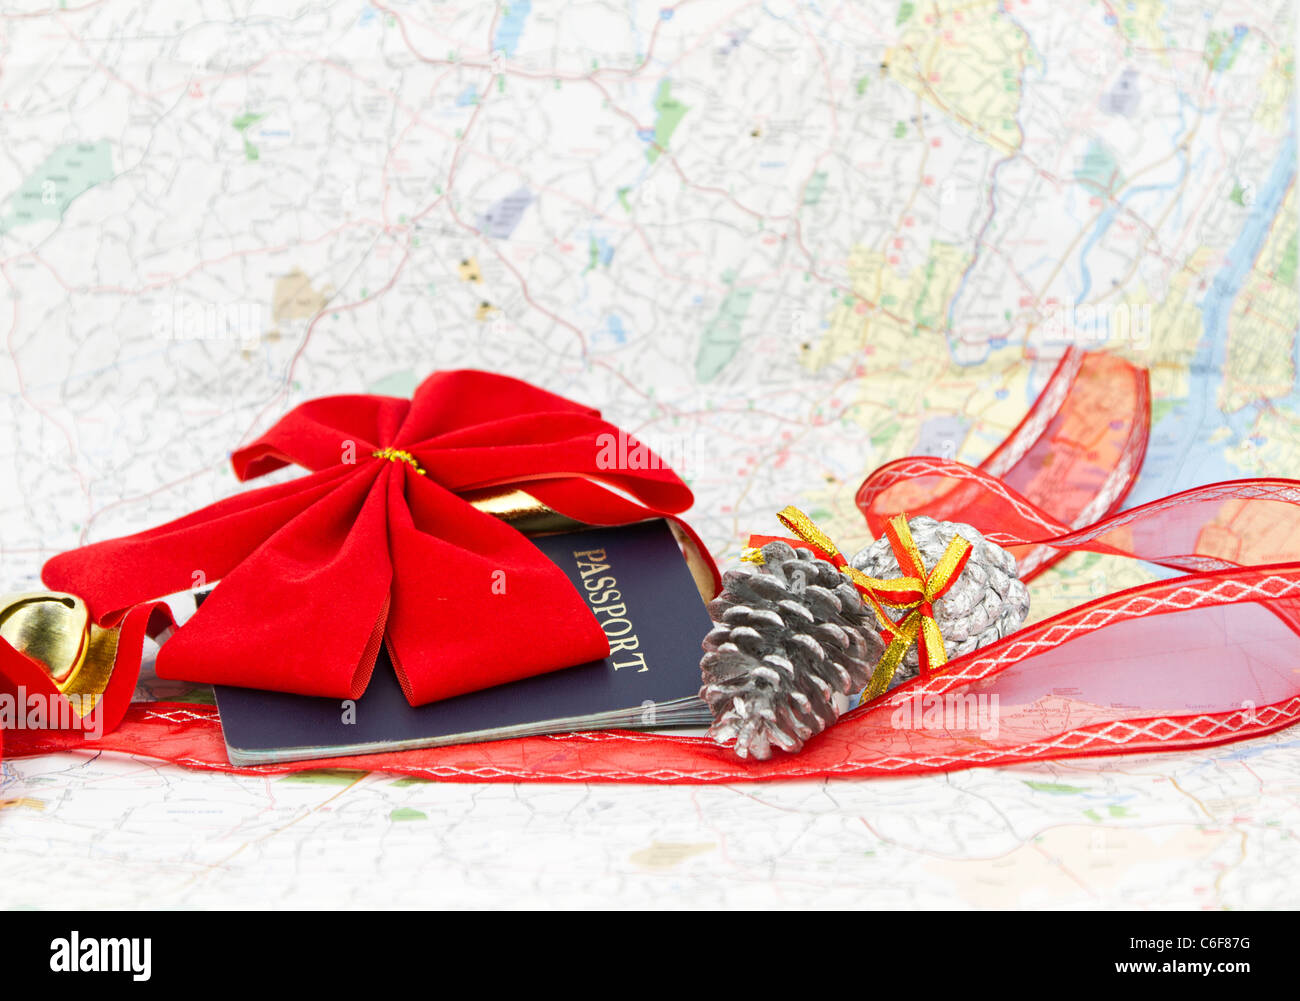 Passport placed with red holiday bow, ribbon, and gold bell with map background; copy space in map area. Stock Photo